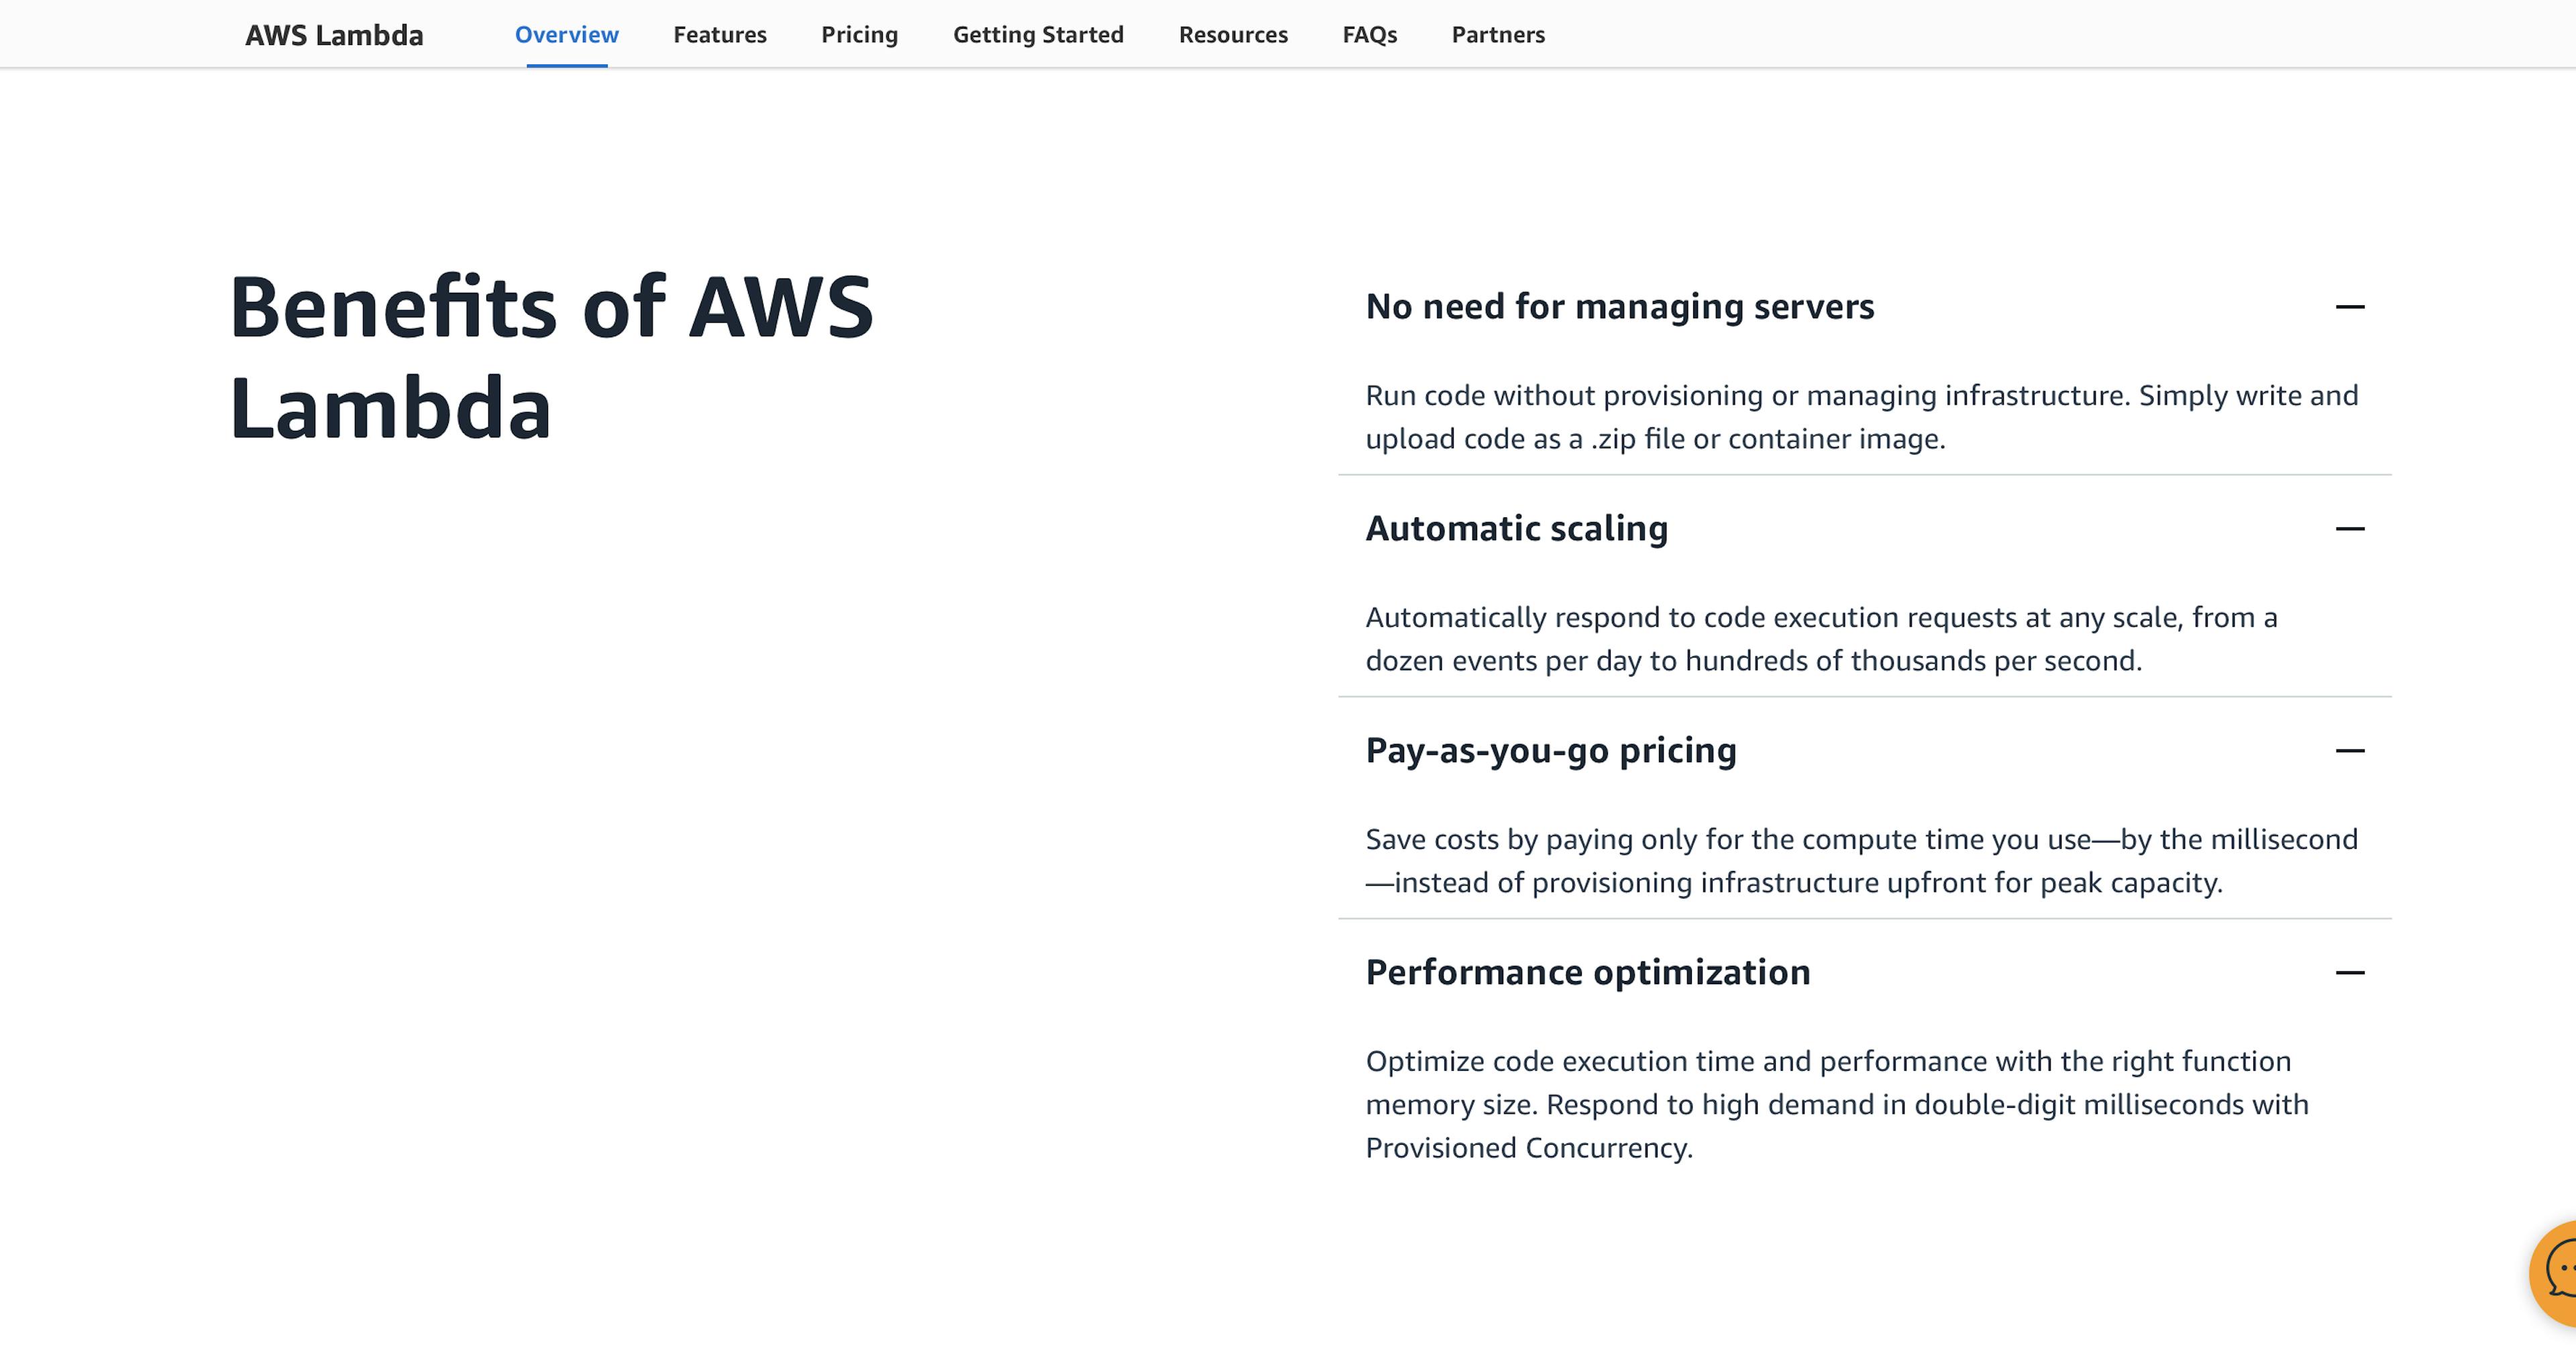 An image of the benefits of AWS lambda page.